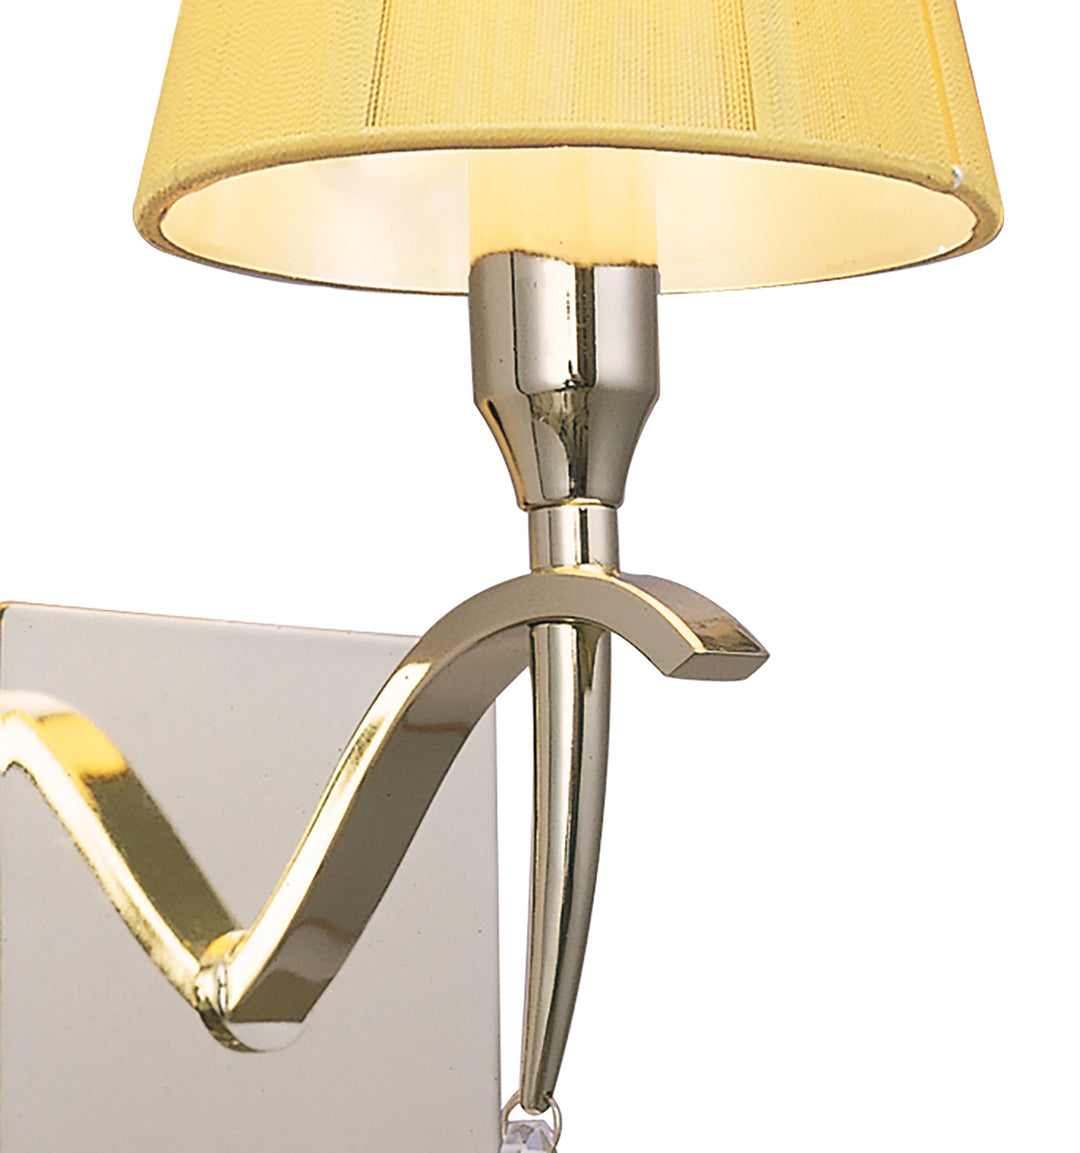 Mantra M0347PB/S Siena Switched Wall Lamp 1 Light